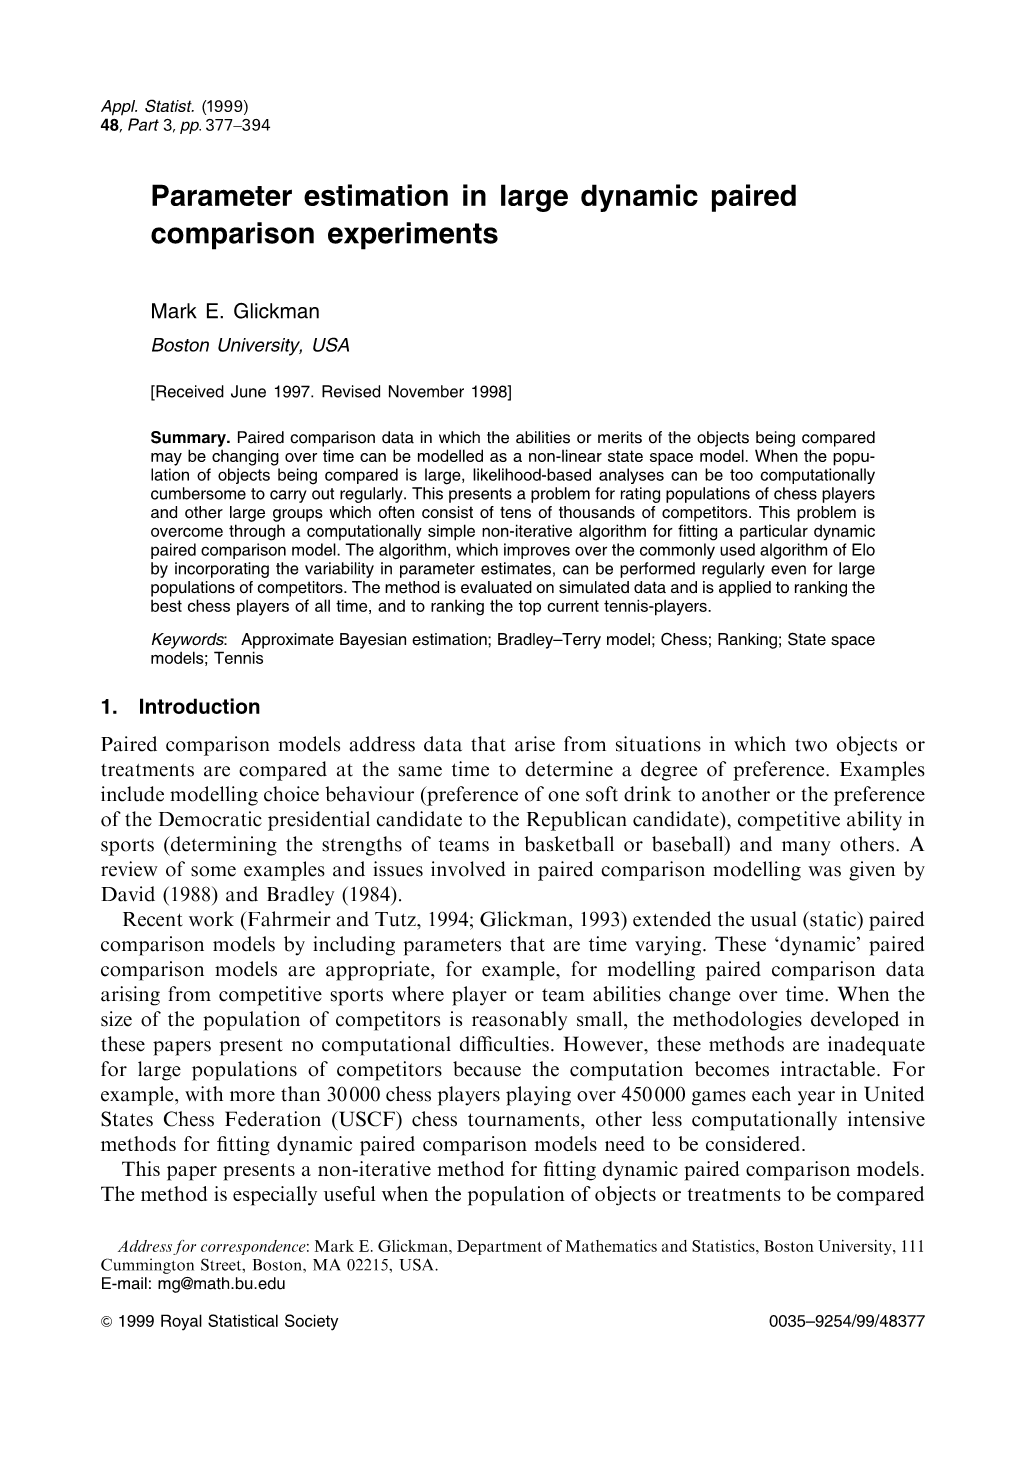 Parameter Estimation in Large Dynamic Paired Comparison Experiments